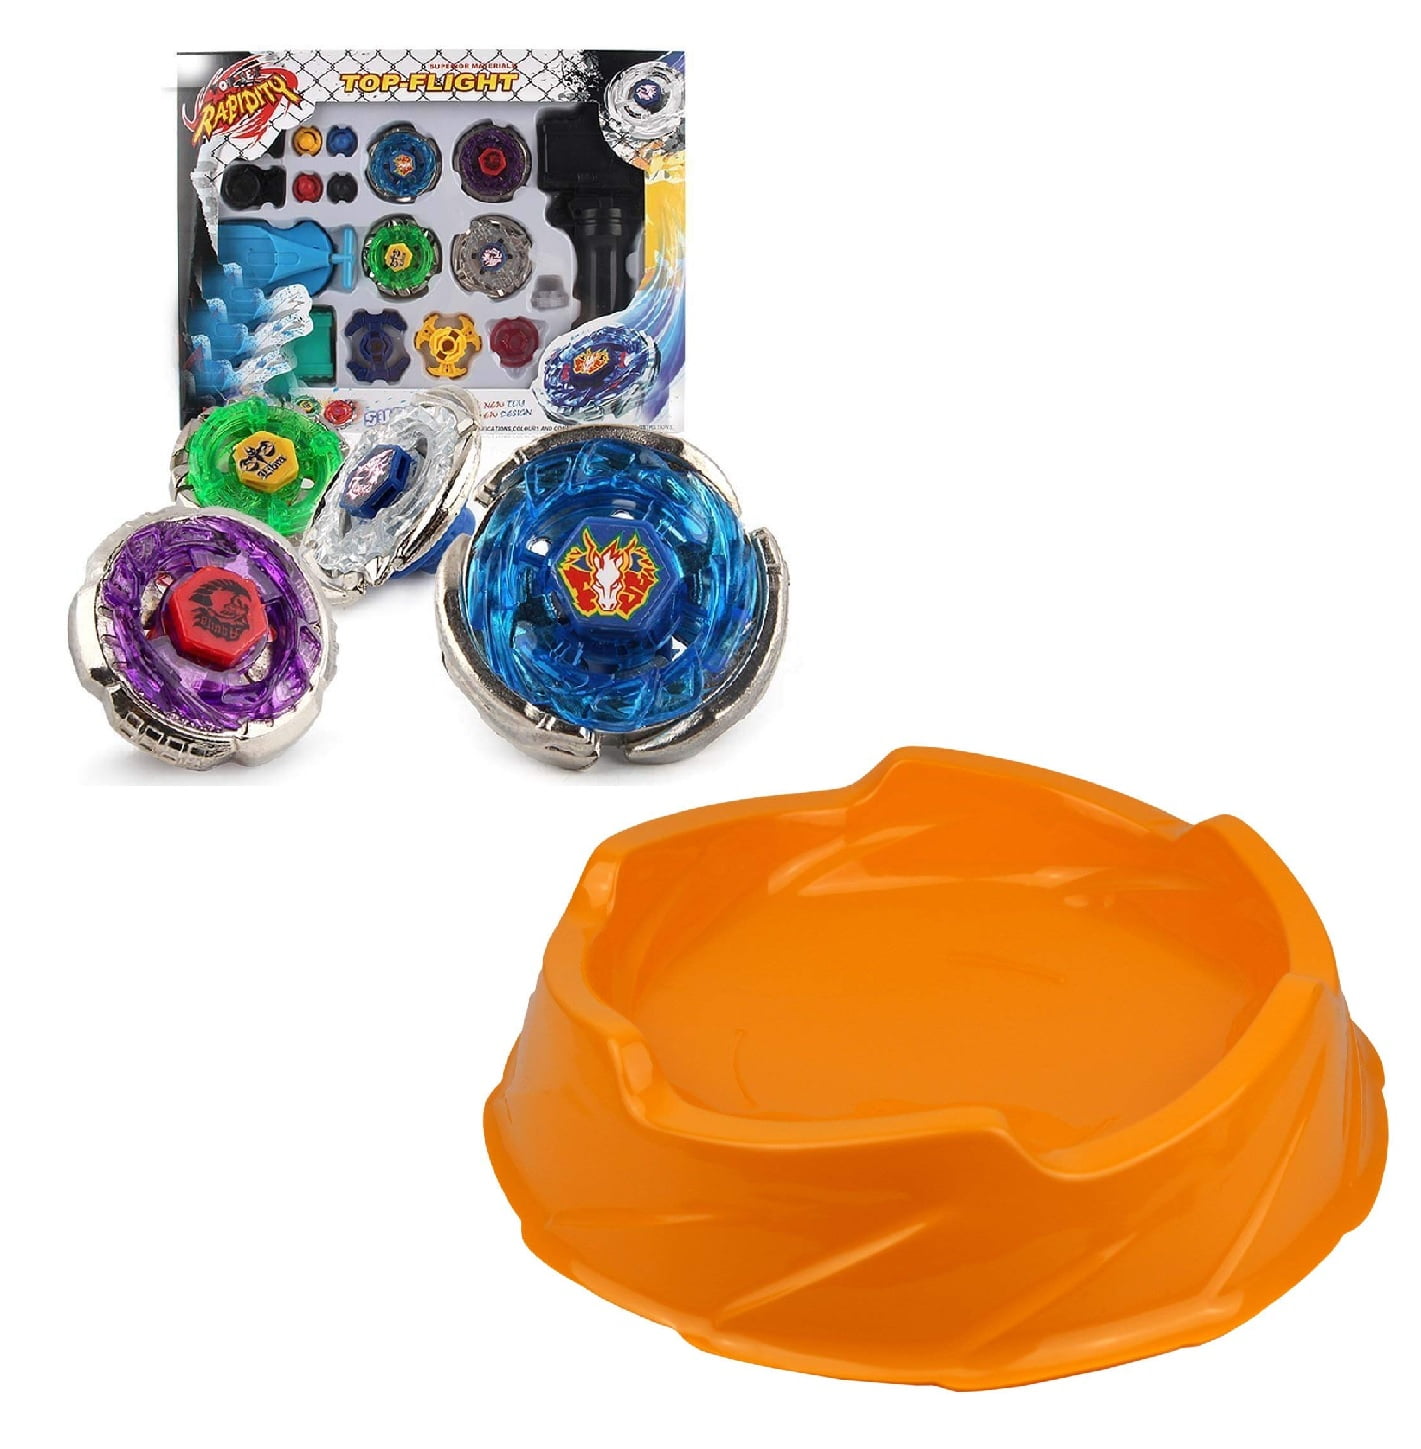 Fusion BEYBLADE Masters Metal Battle FIGHT MASTER Single String Launcher NEW 